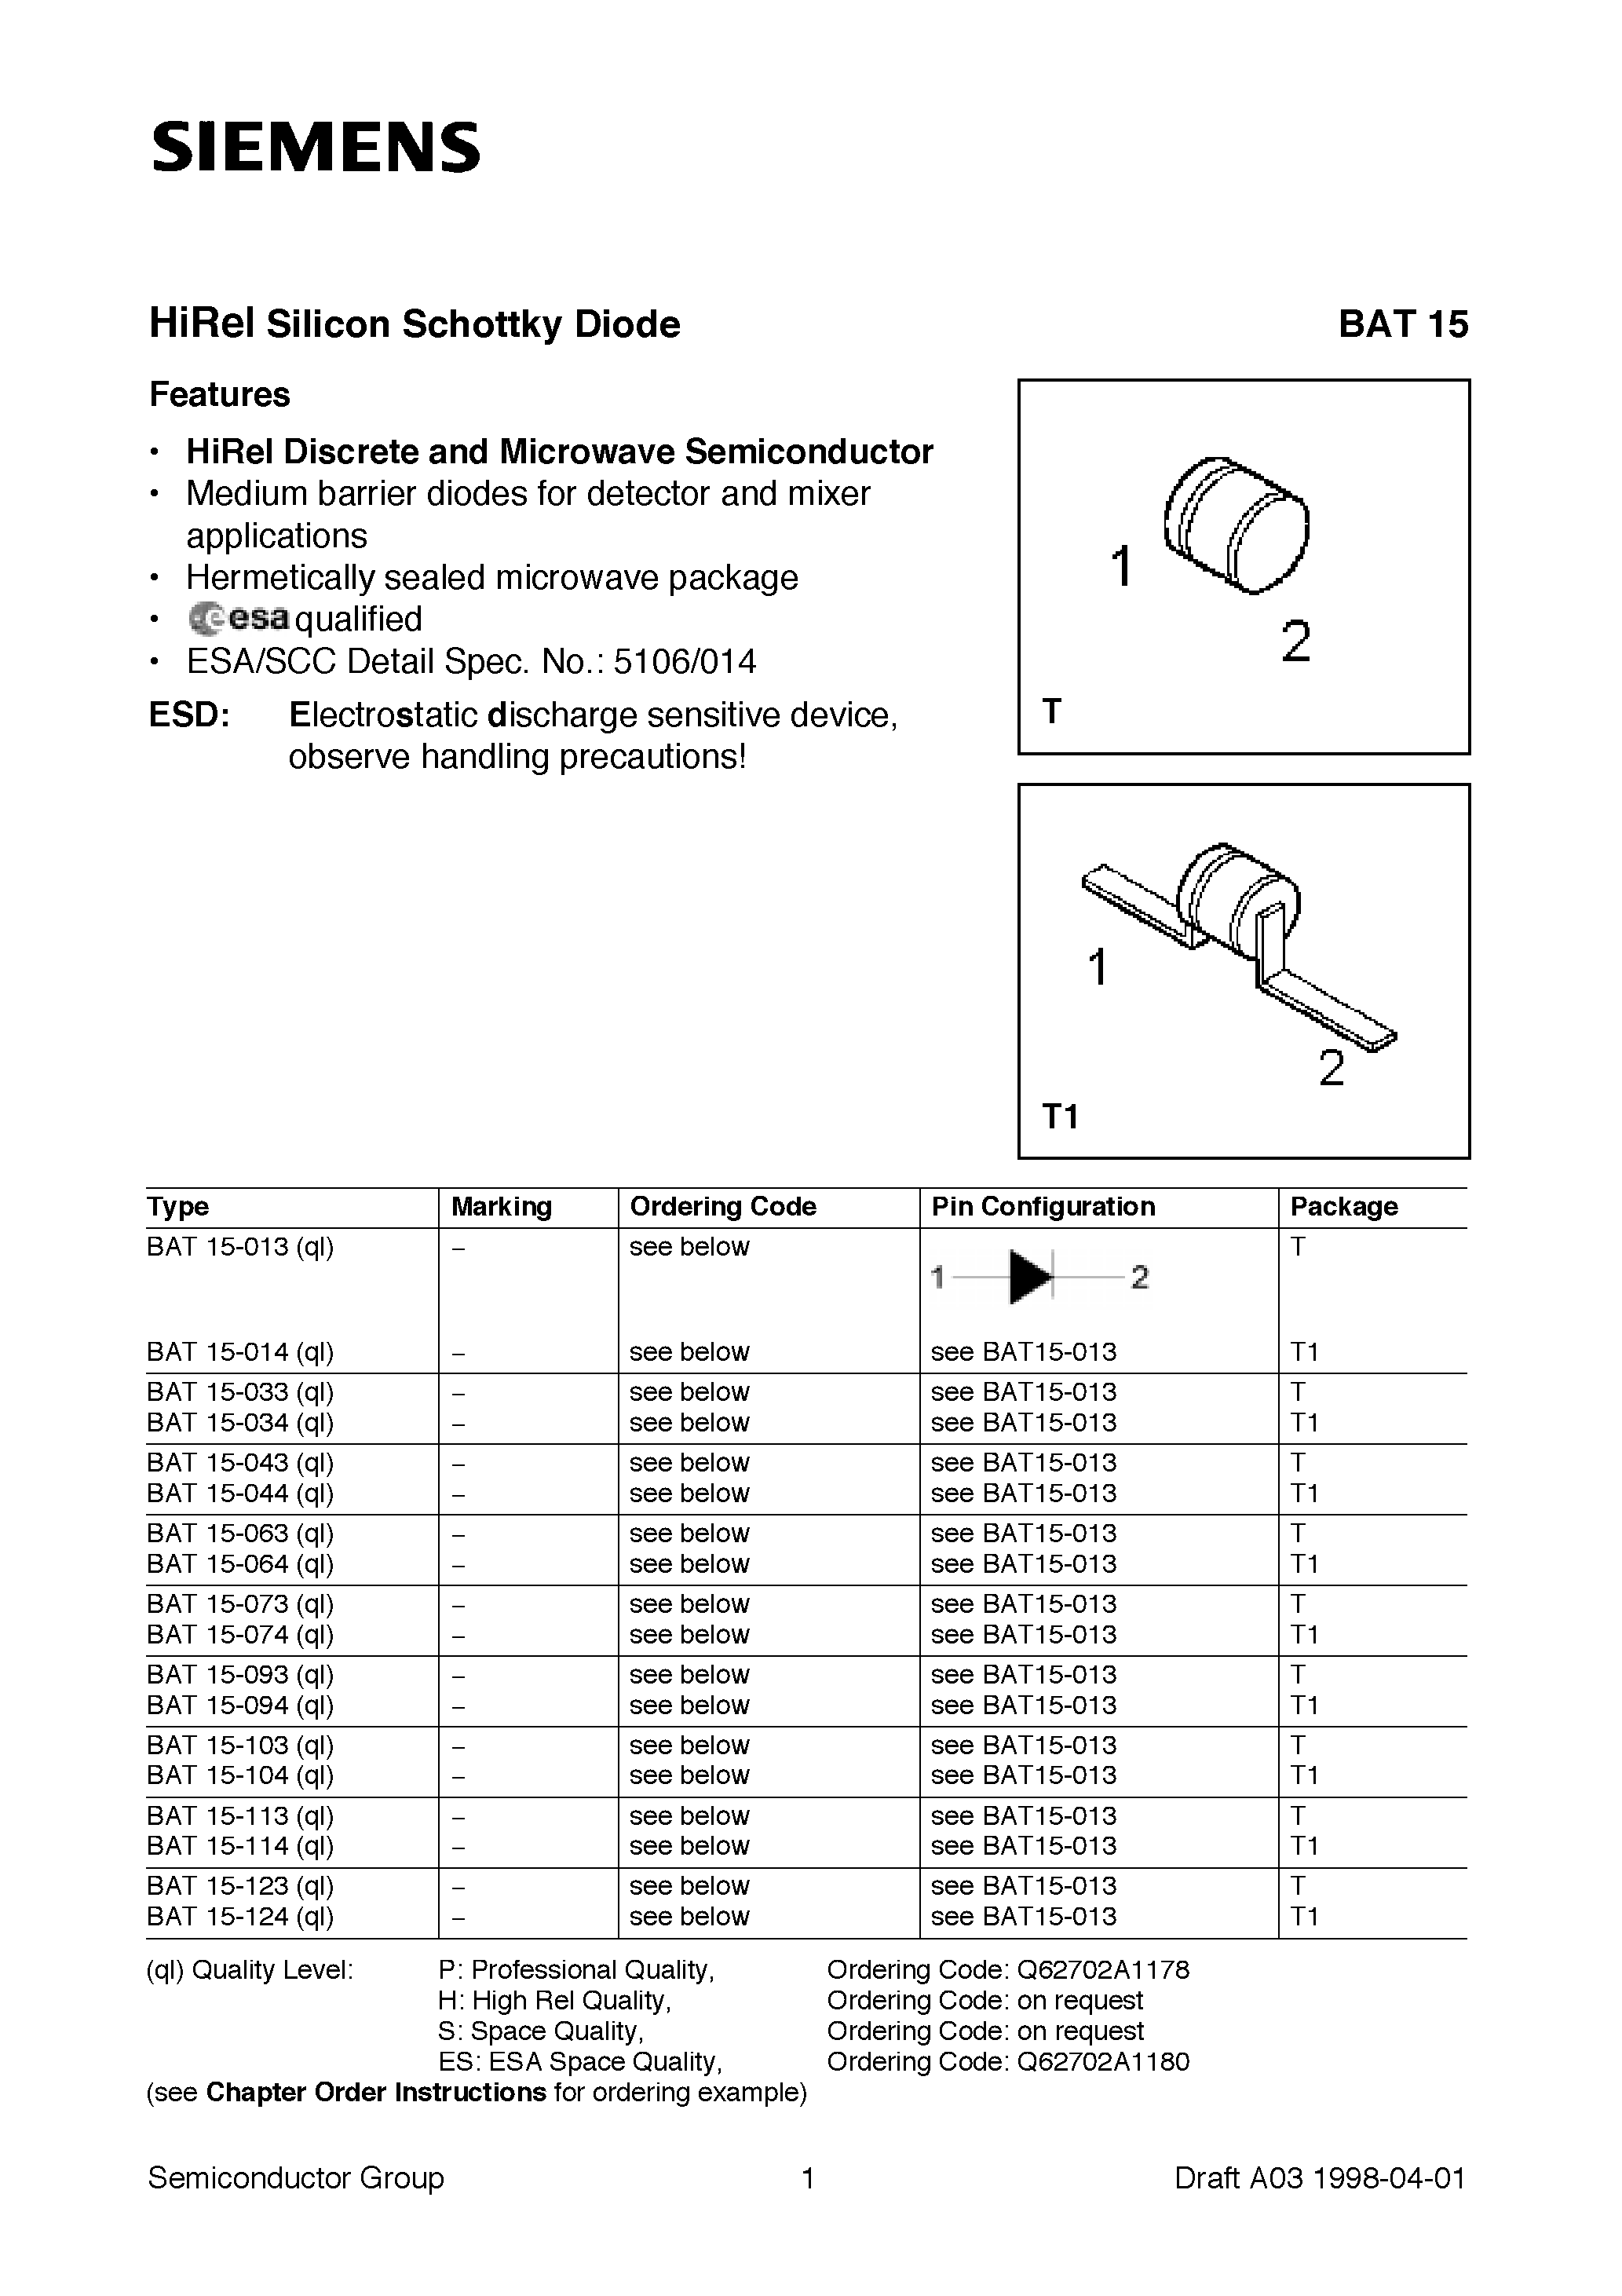 Datasheet BAT15-043 - HiRel Silicon Schottky Diode (HiRel Discrete and Microwave Semiconductor Medium barrier diodes for detector and mixer applications) page 1